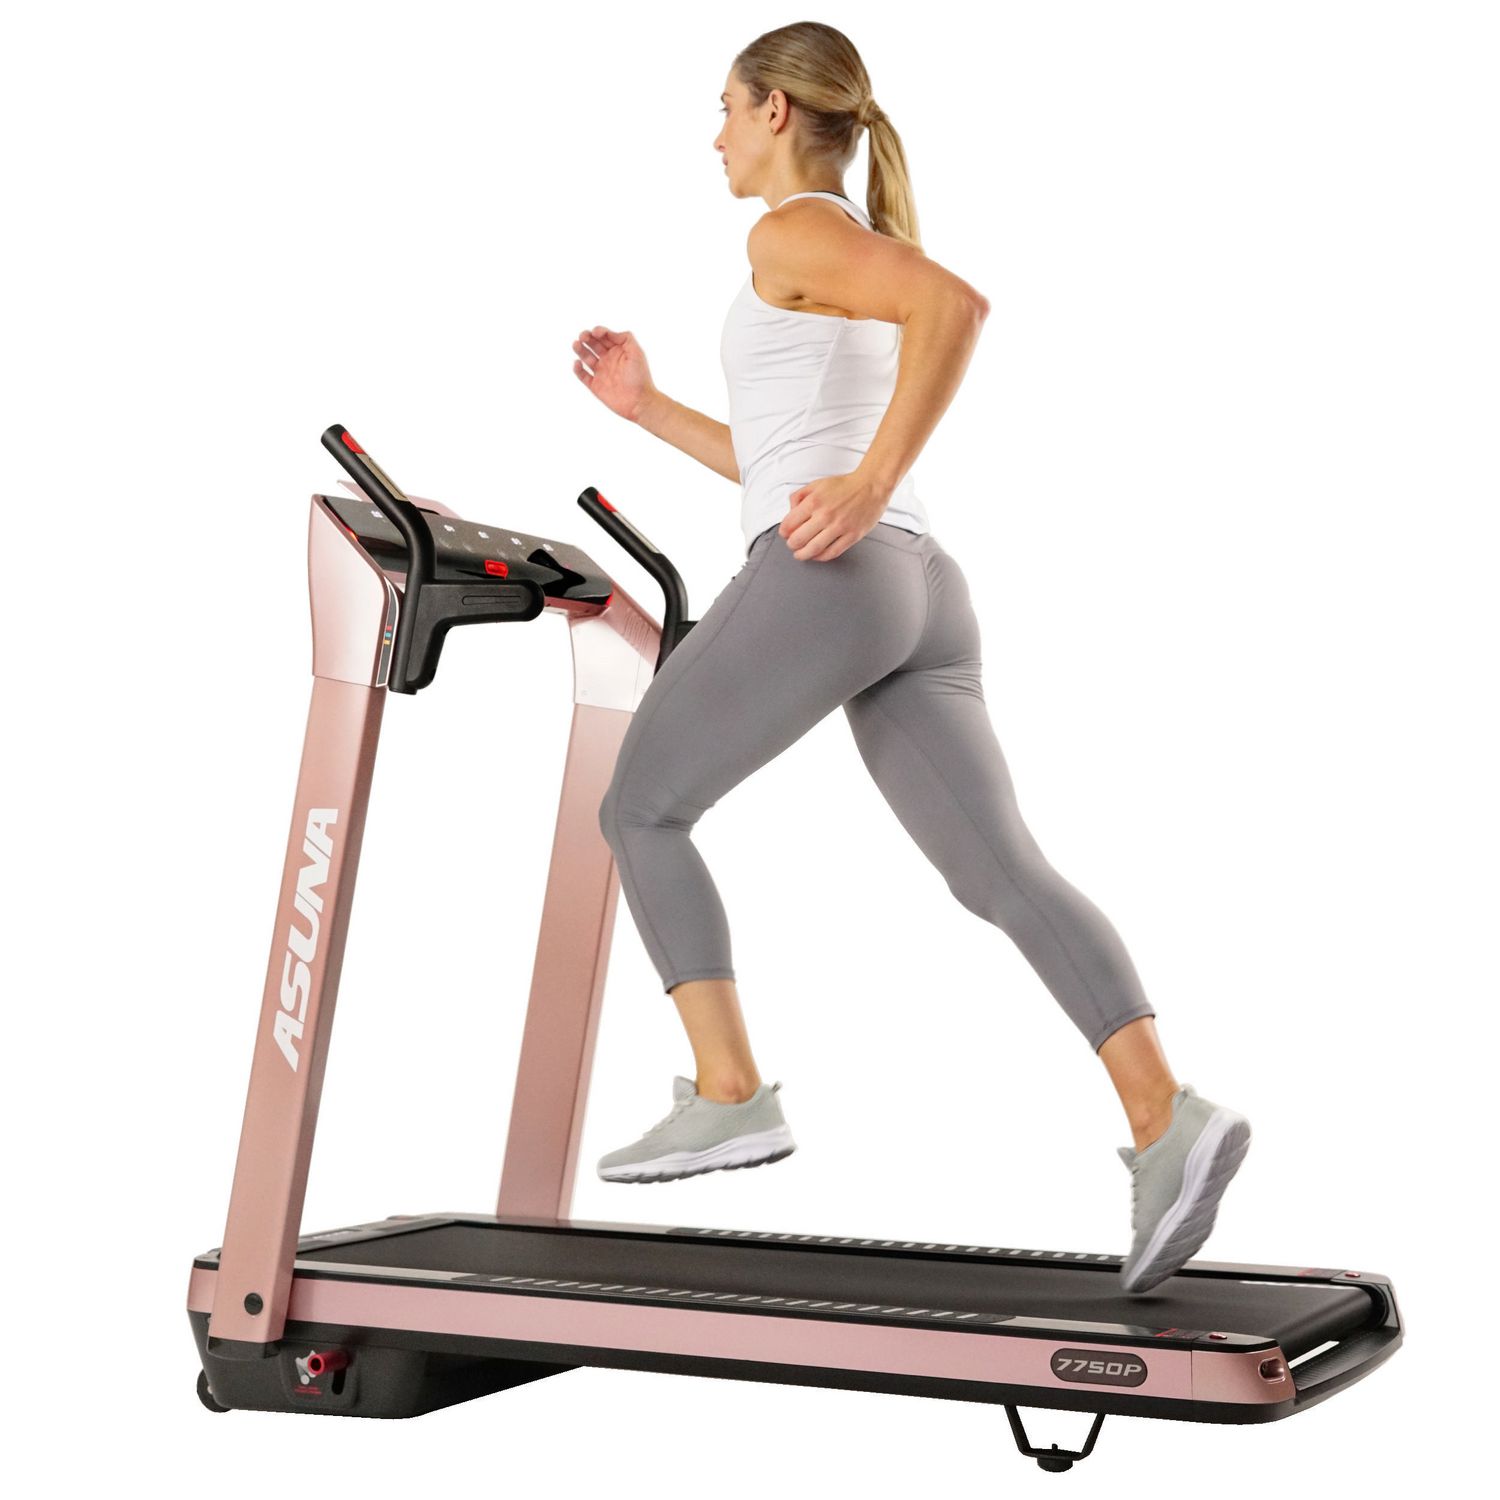 ASUNA SpaceFlex Motorized Running Treadmill with Auto Incline, Wide